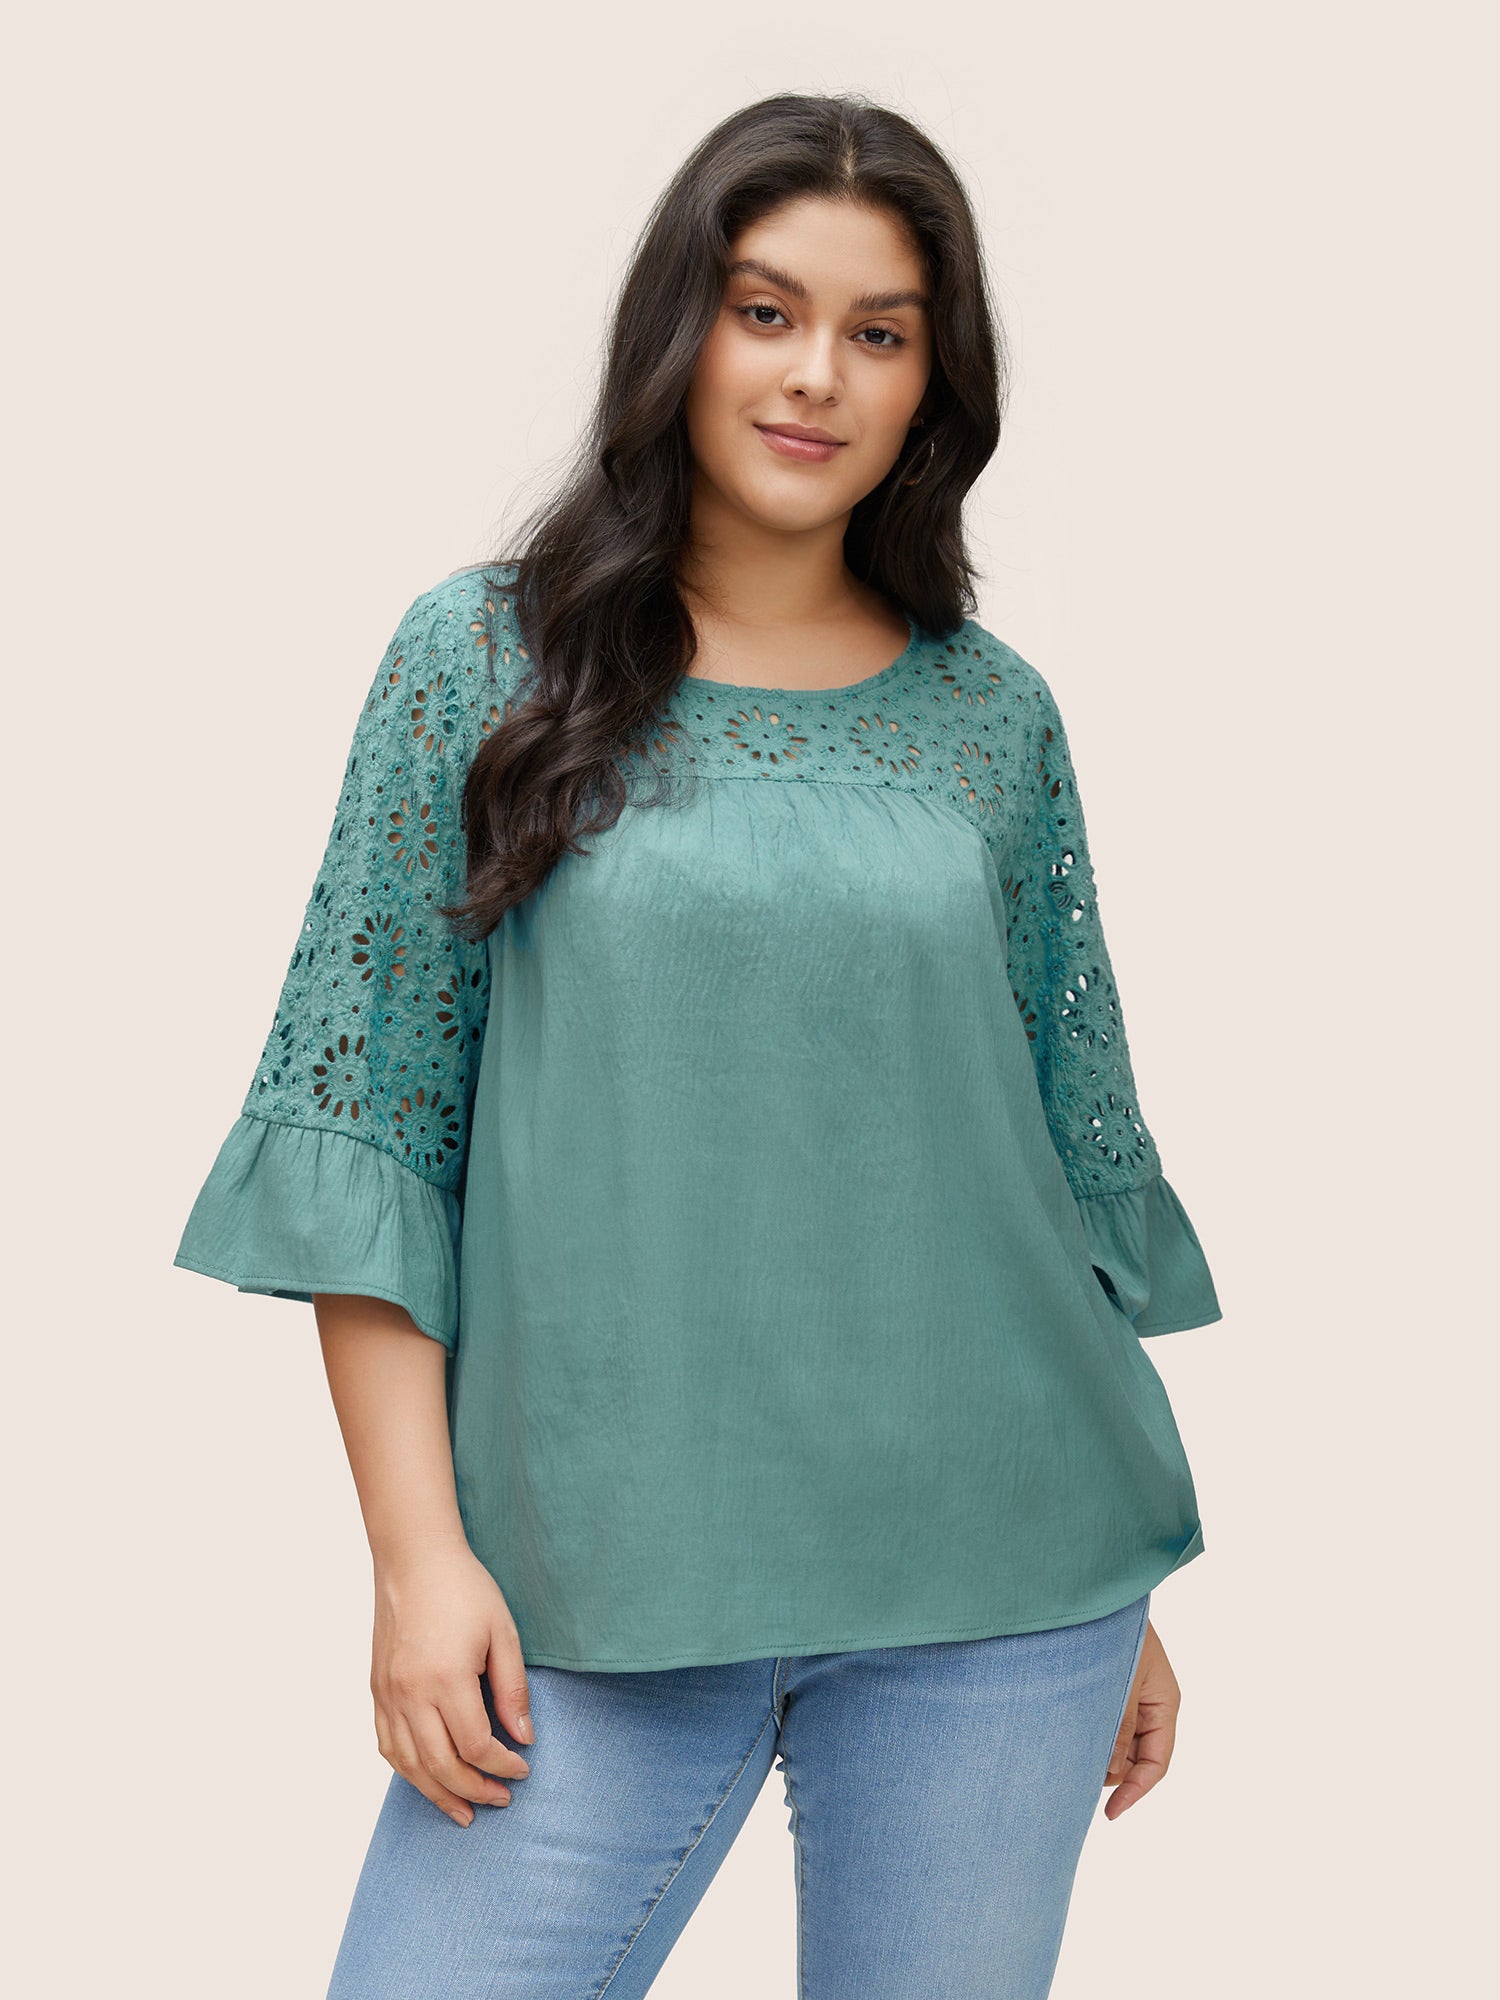 

Plus Size Women Everyday Plain Patchwork Ruffle Sleeve Elbow-length sleeve Round Neck Casual Blouses BloomChic, Mint